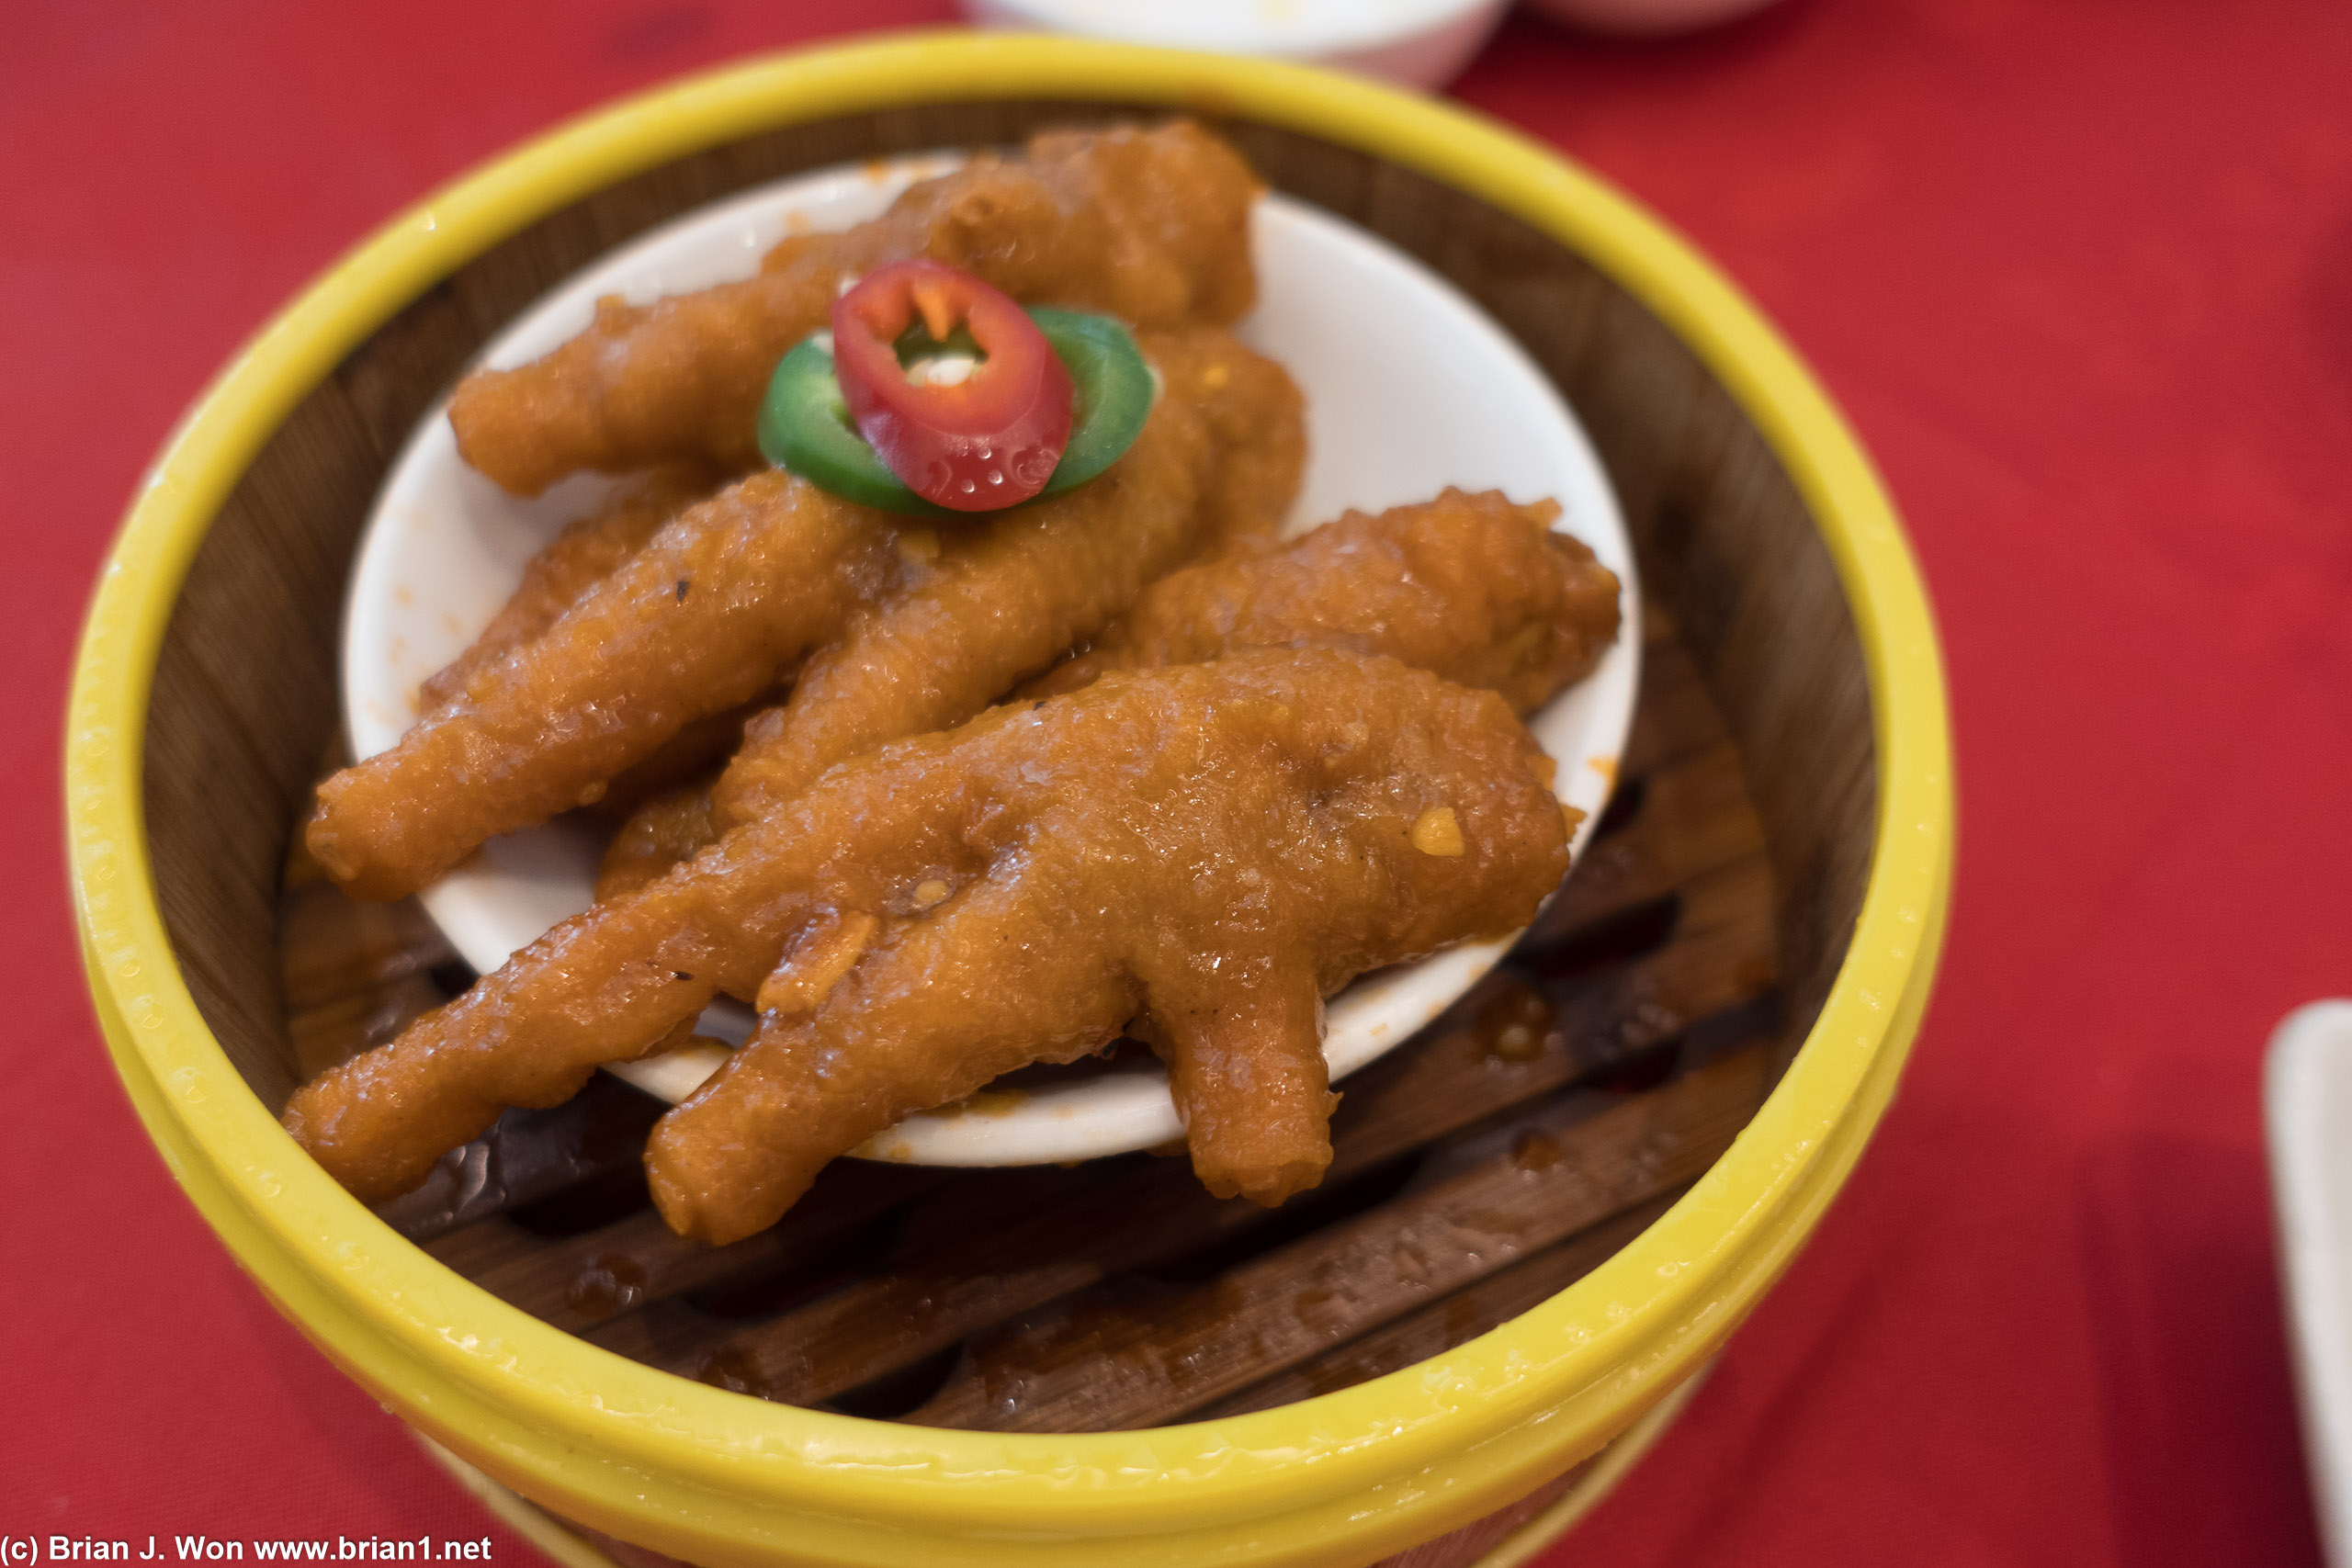 Chicken feet were plump and decently flavorful, but lacking in black beans.